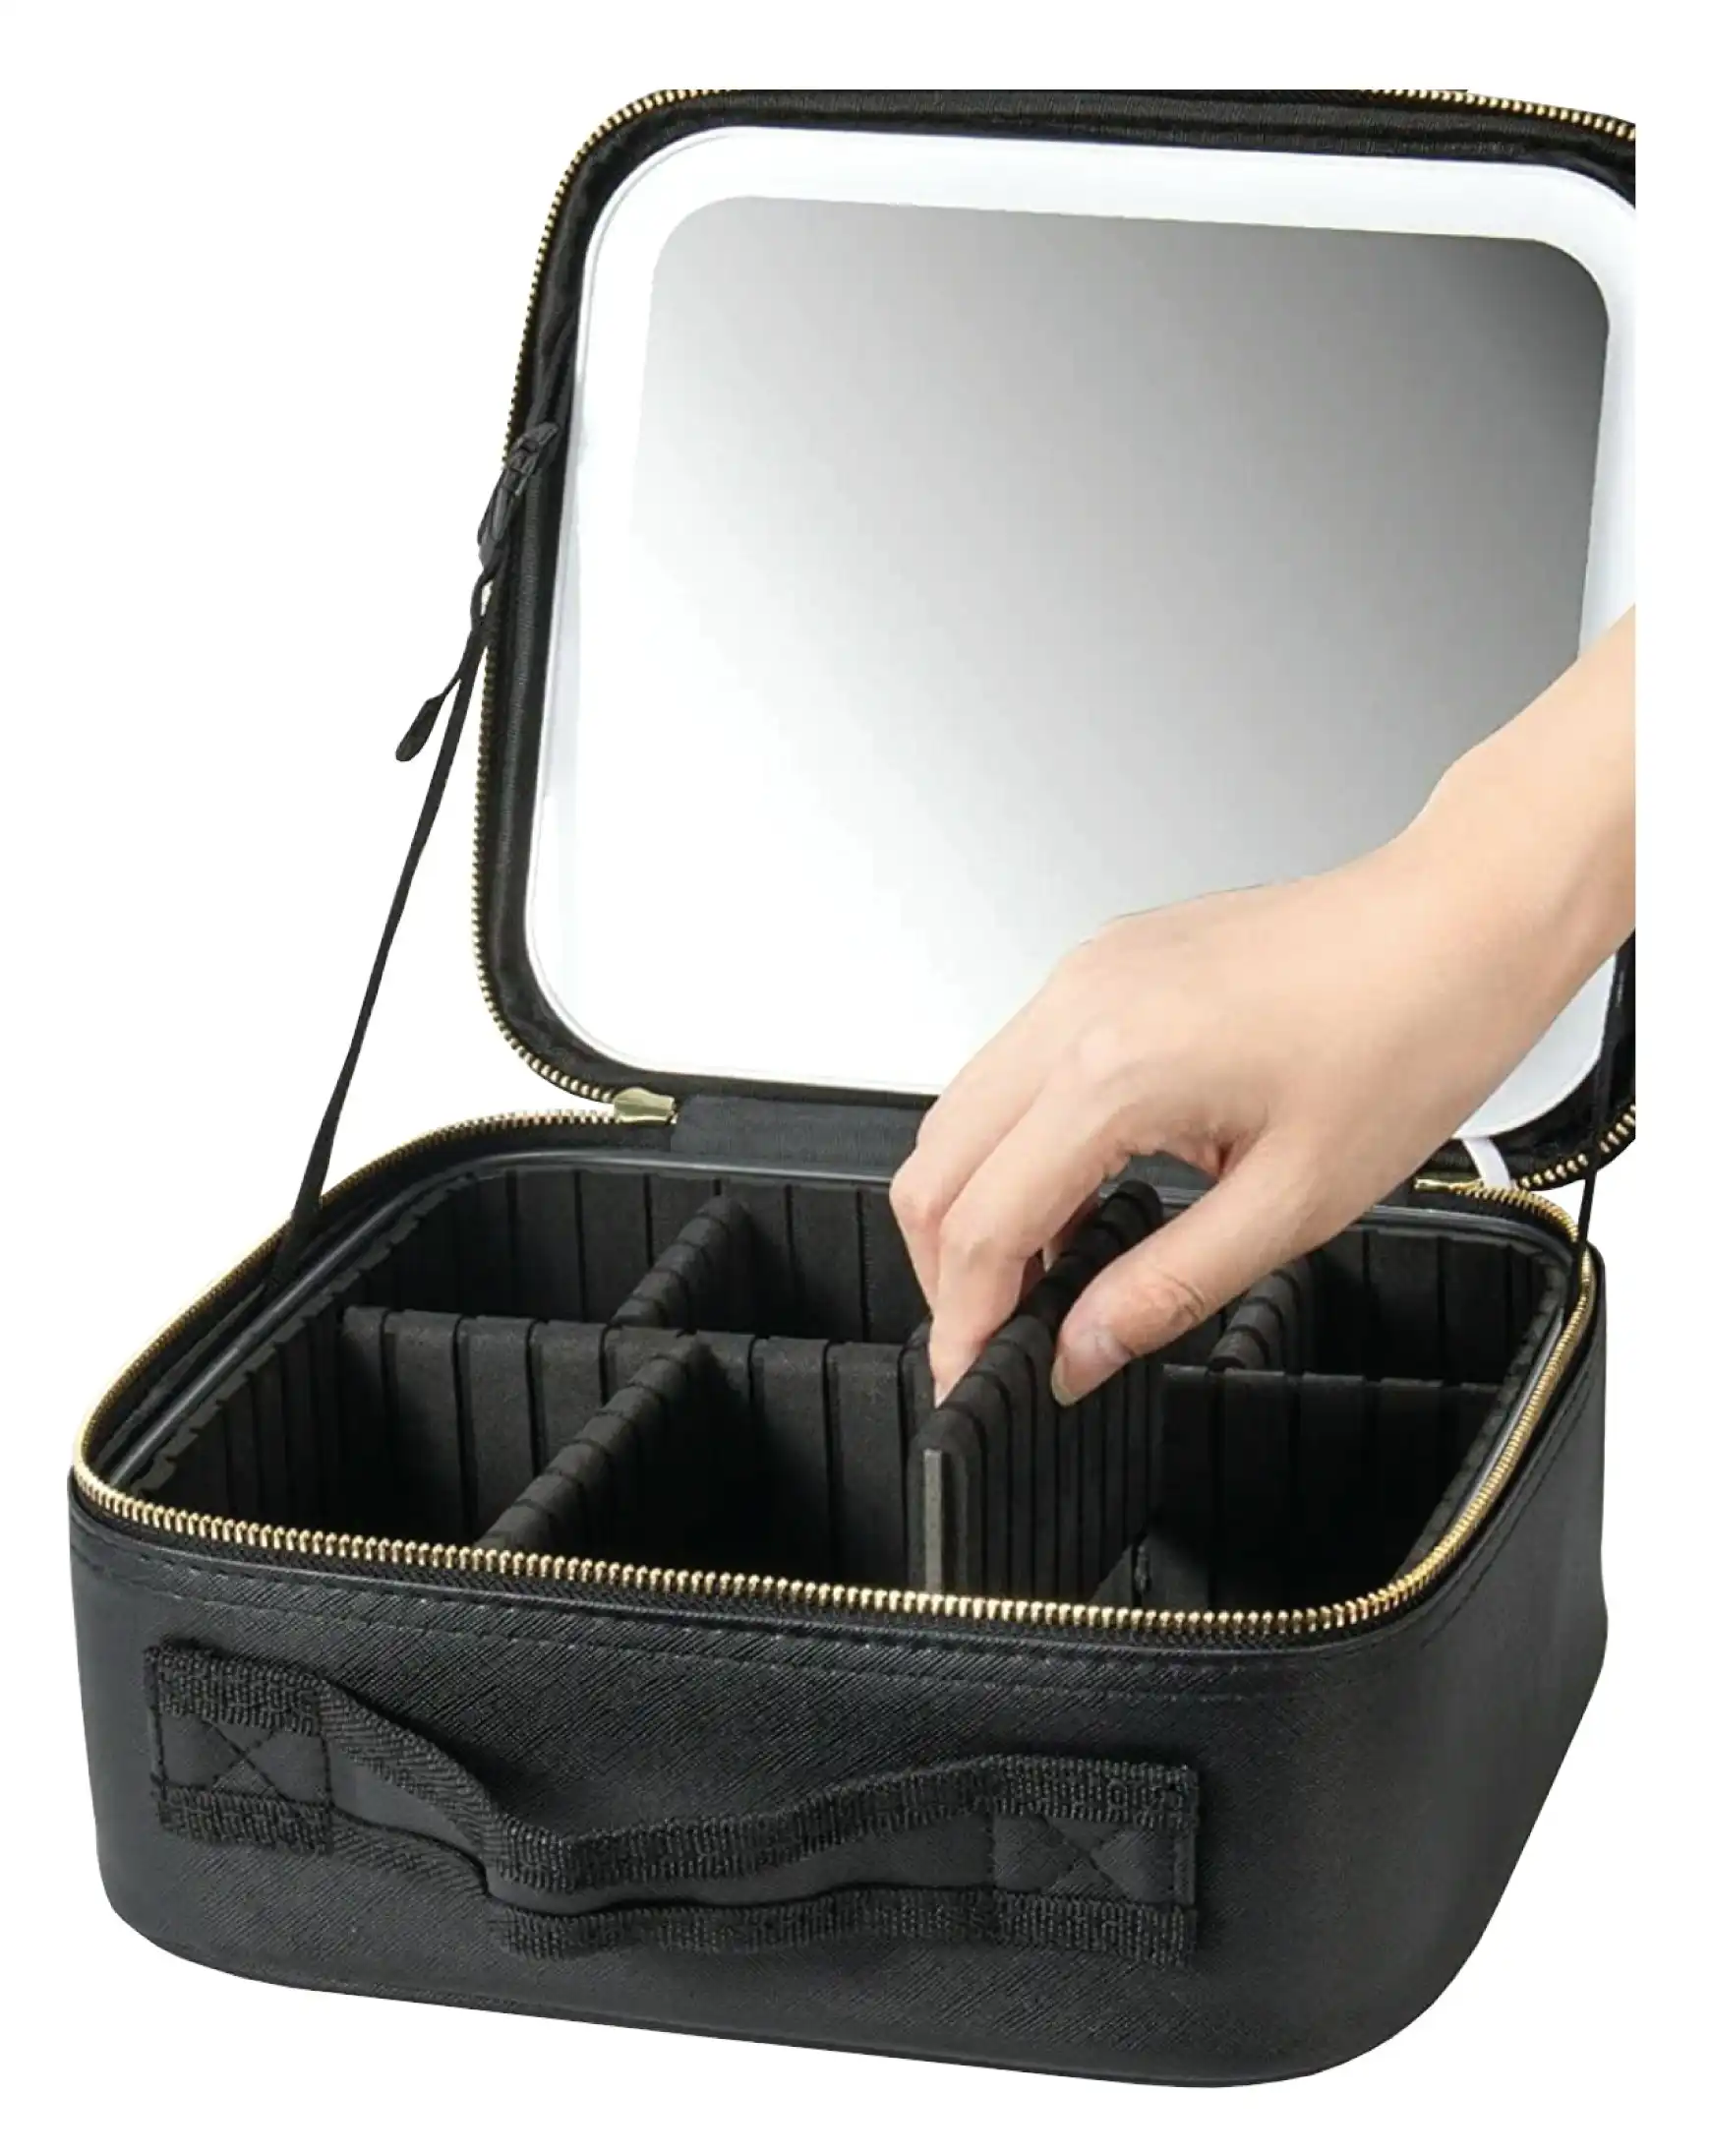 Impressions Cosmetic Bag With Mirror Black - featuring built-in LED lighting